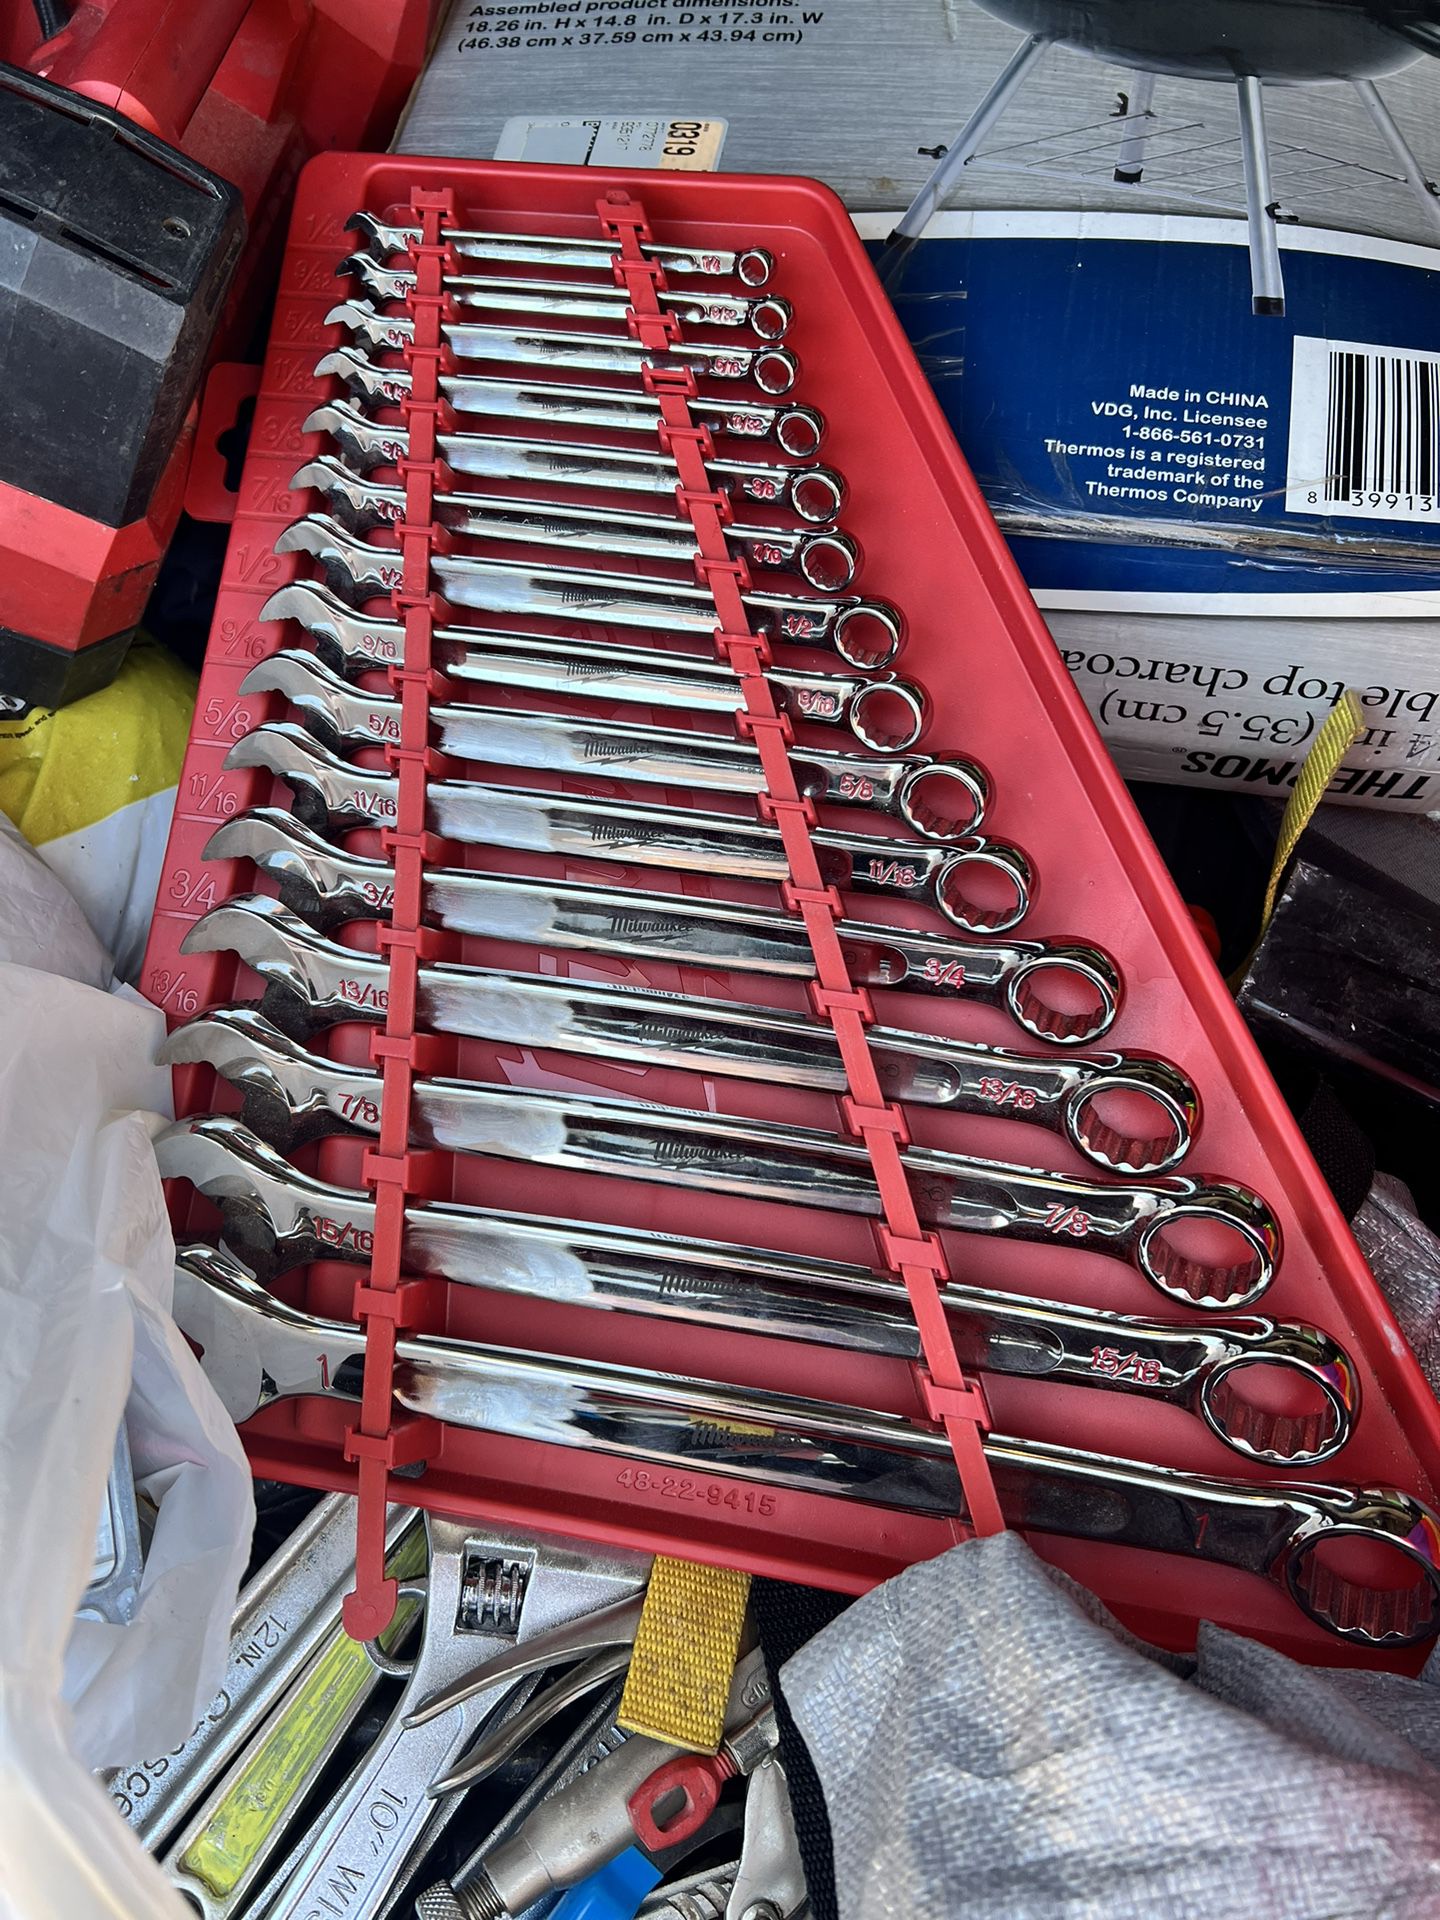 Milwaukee Wrenches With Tray